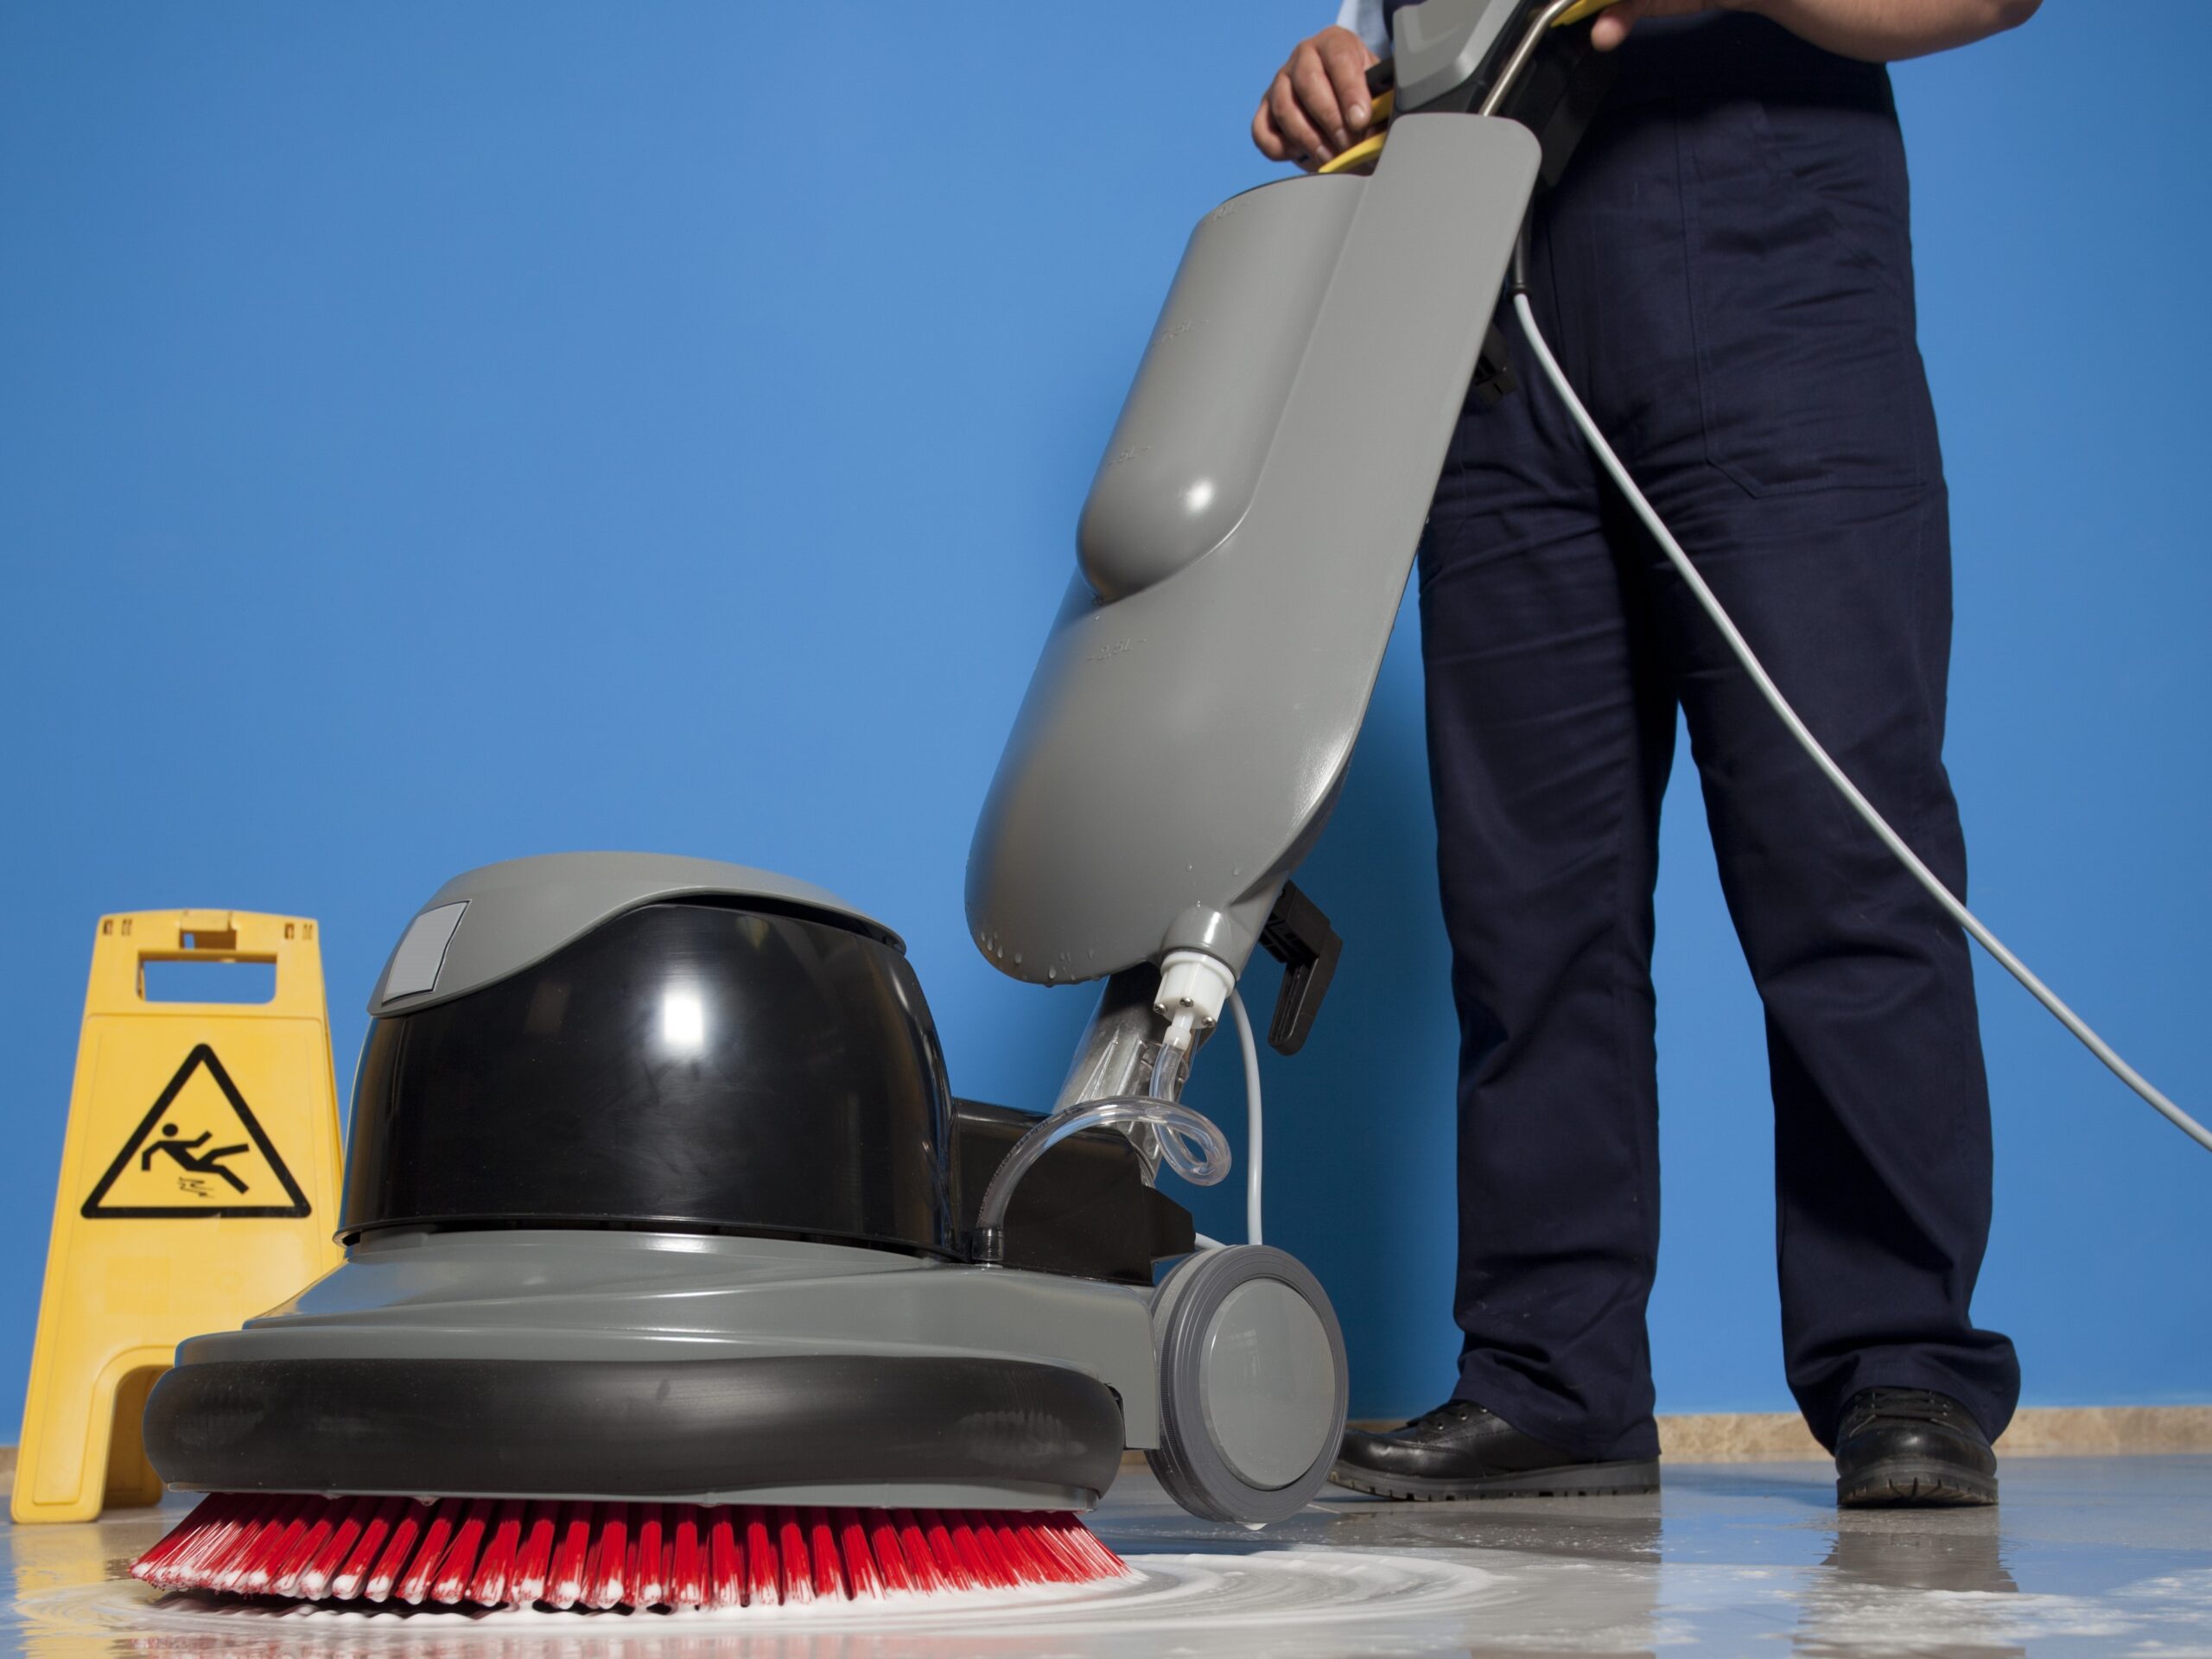 A Man worker cleaning the floor with scrubber machine. image